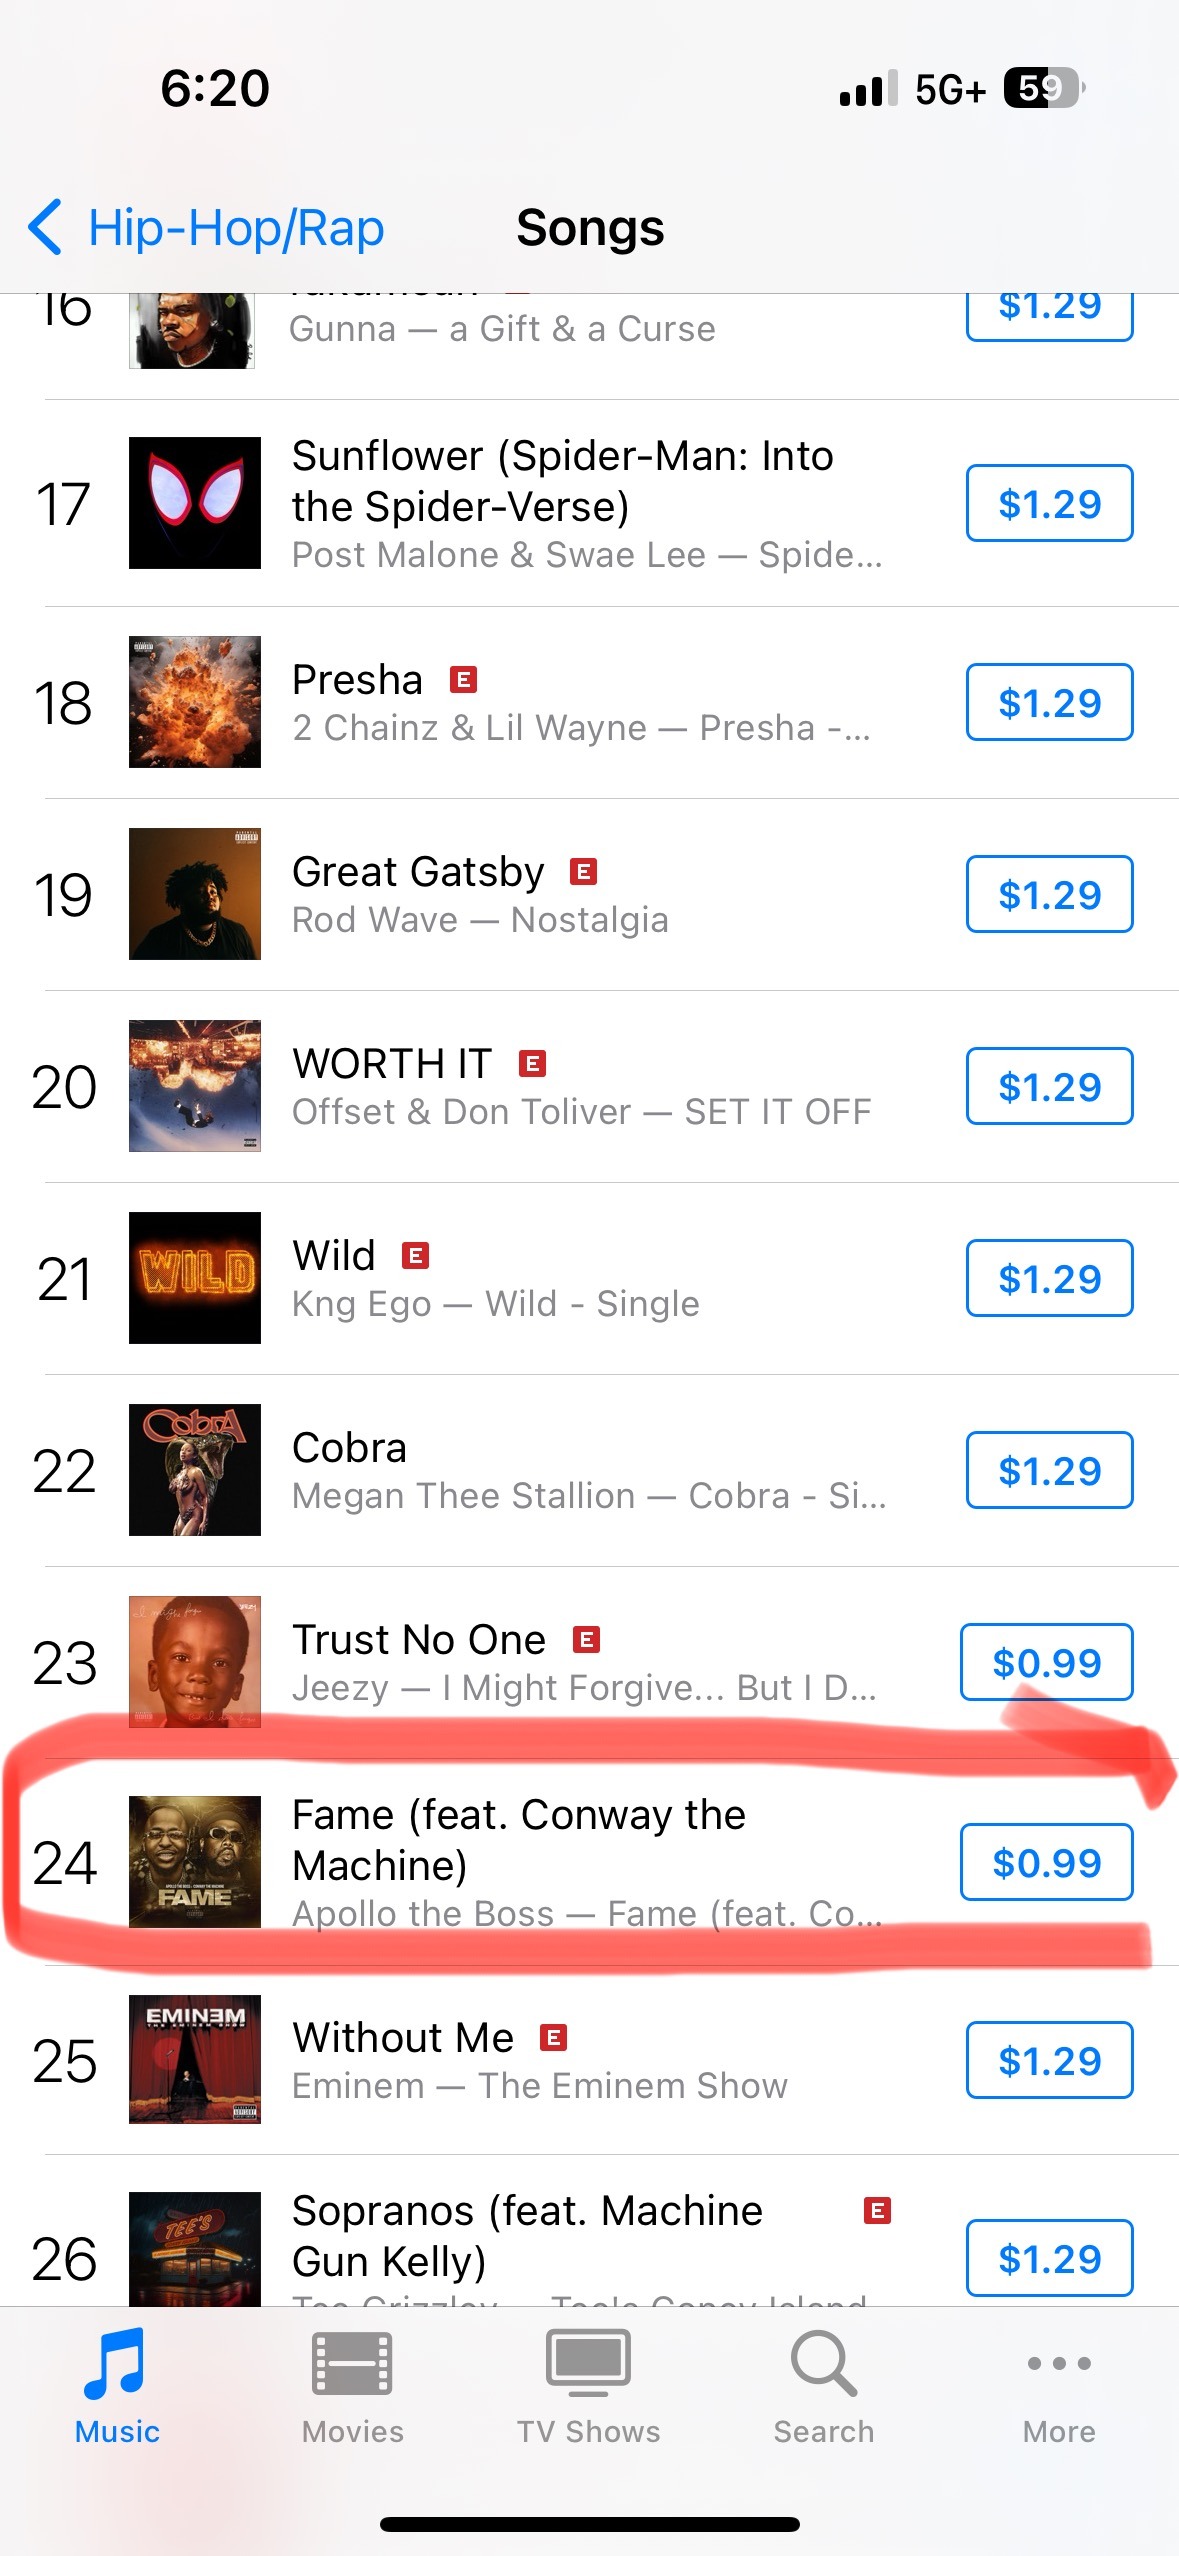 Apollo the Boss: Rising Star's New Single "Fame" Hits #24 on iTunes Hip-Hop and Rap Charts